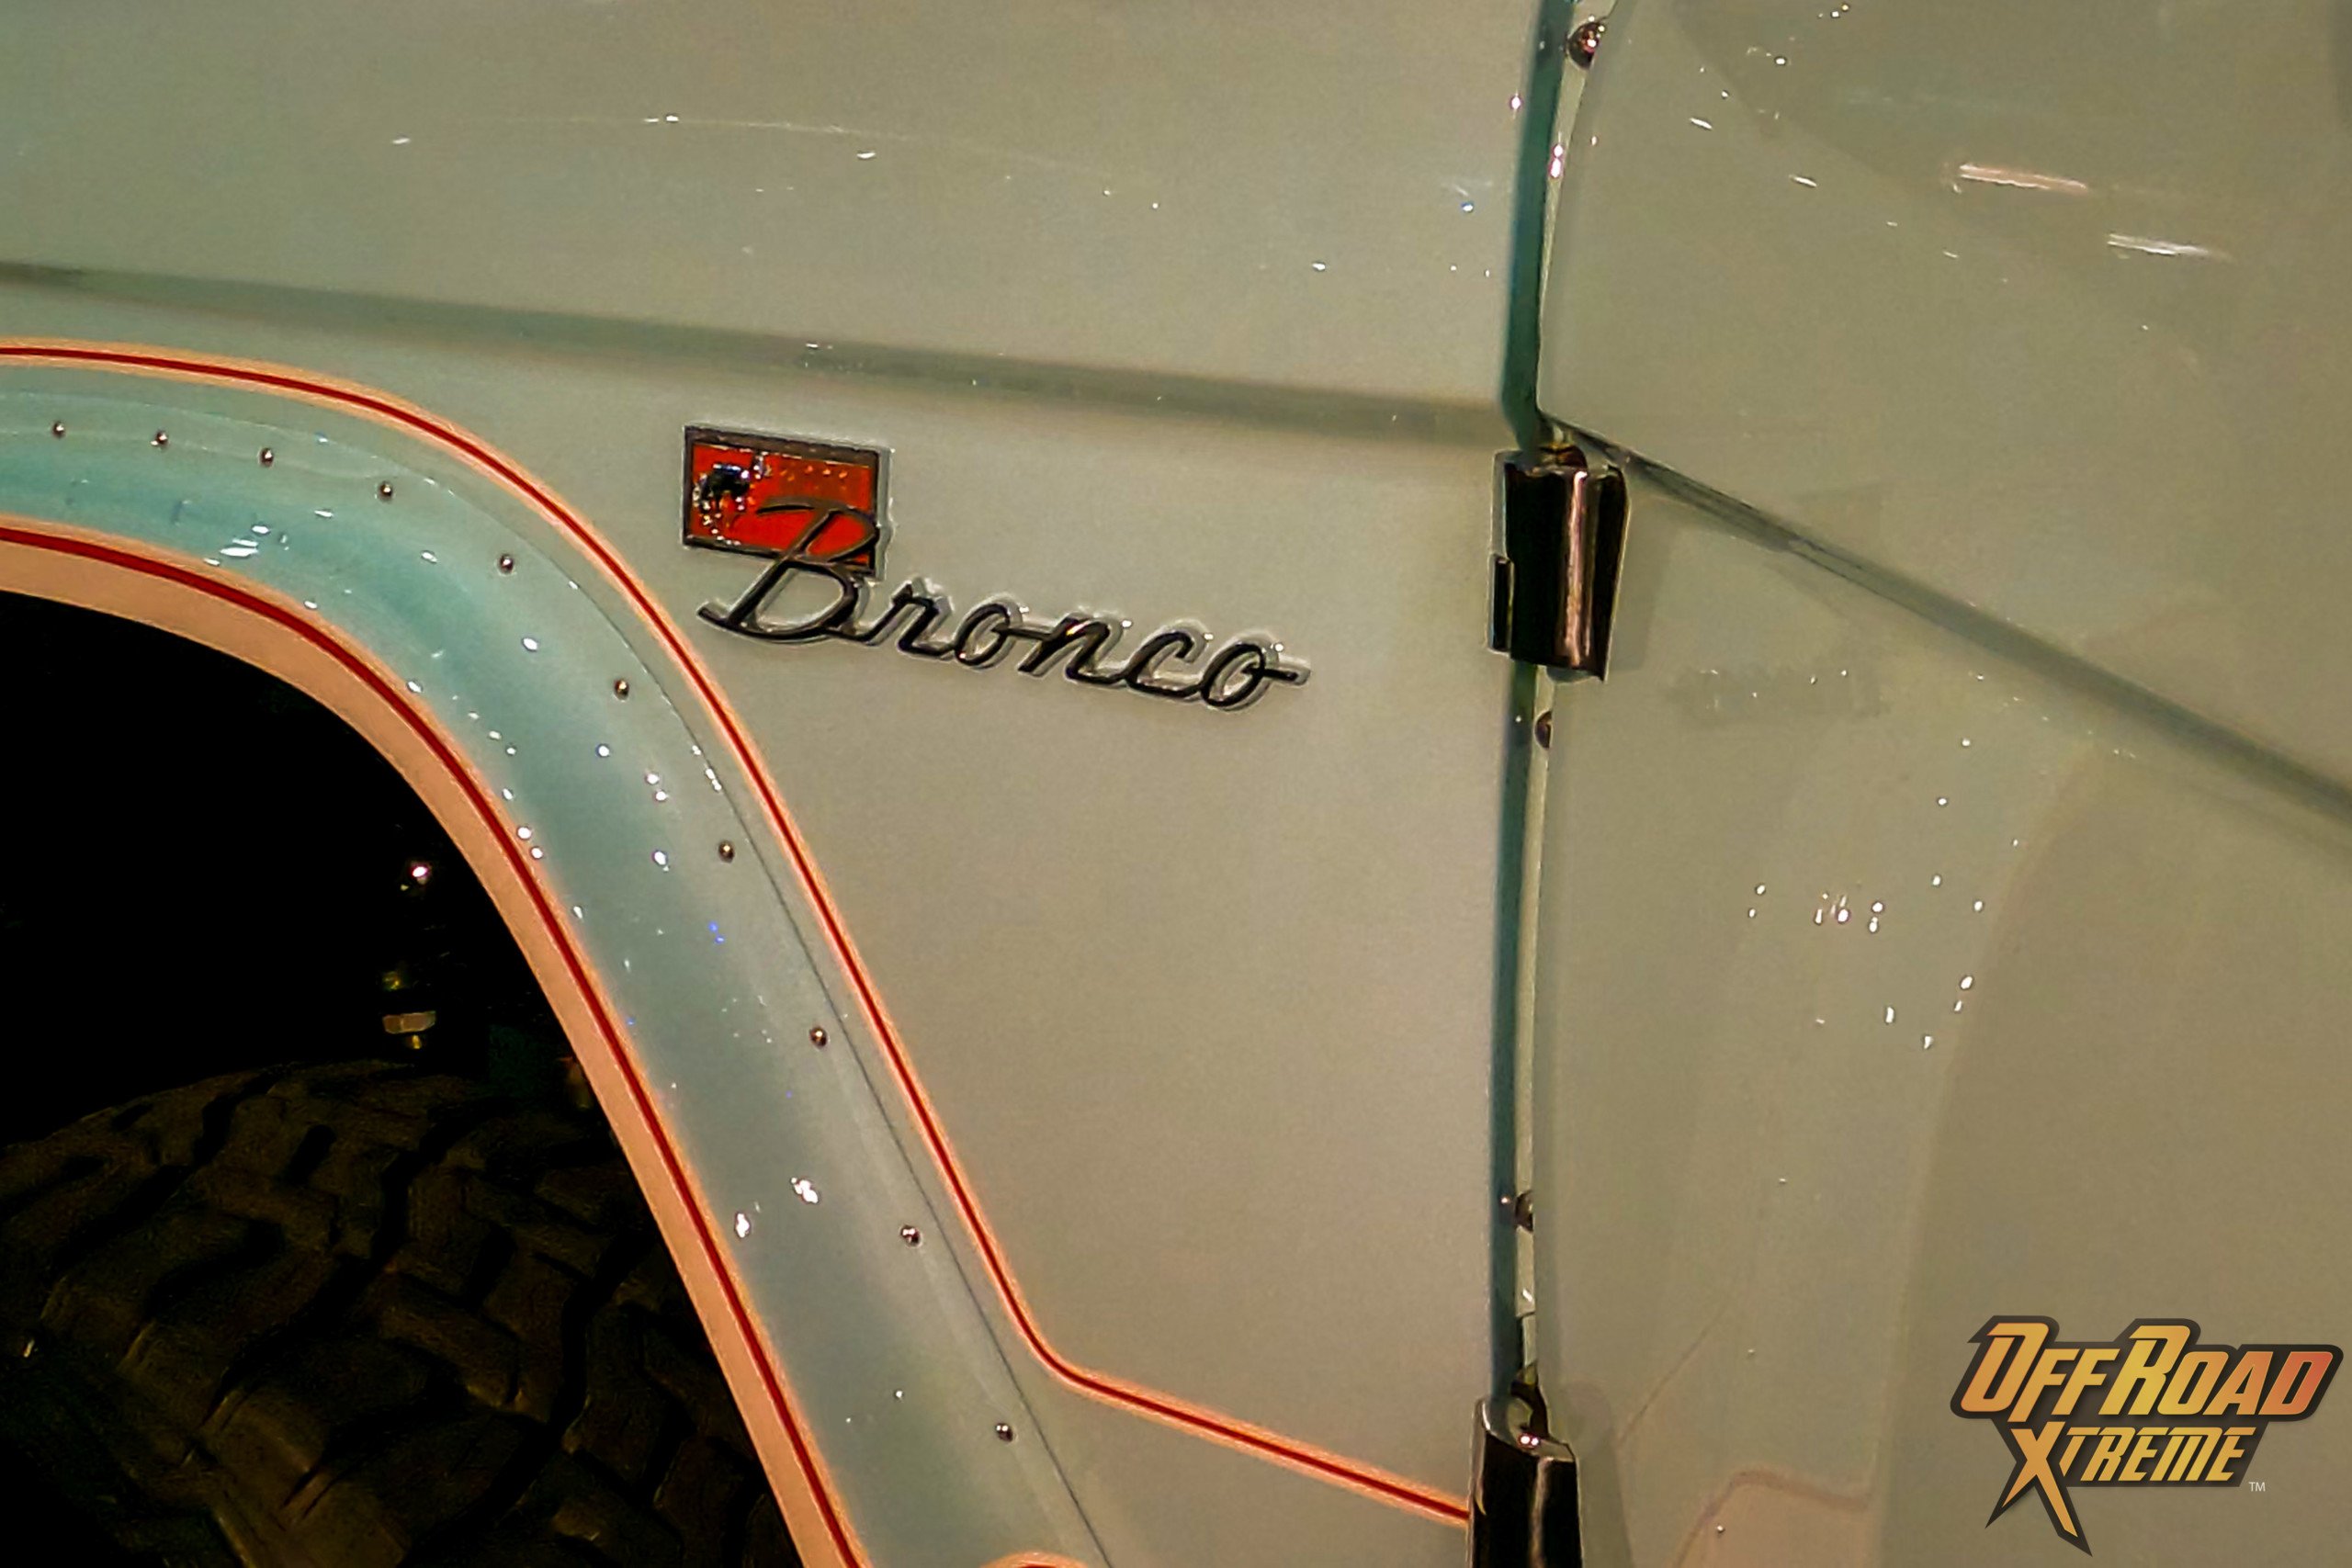 Gateway Bronco Electric Vehicle Spotted At Barrett-Jackson